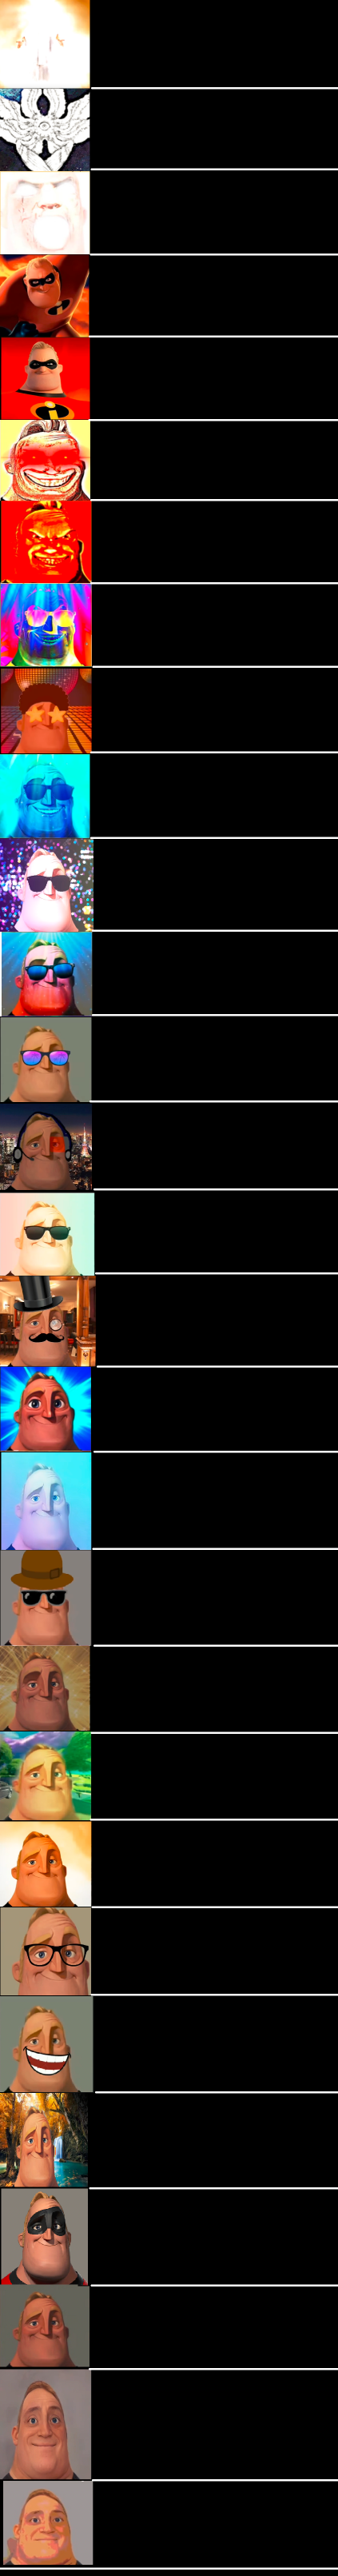 mr-incredible-becoming-ultimate-canny-memes-imgflip